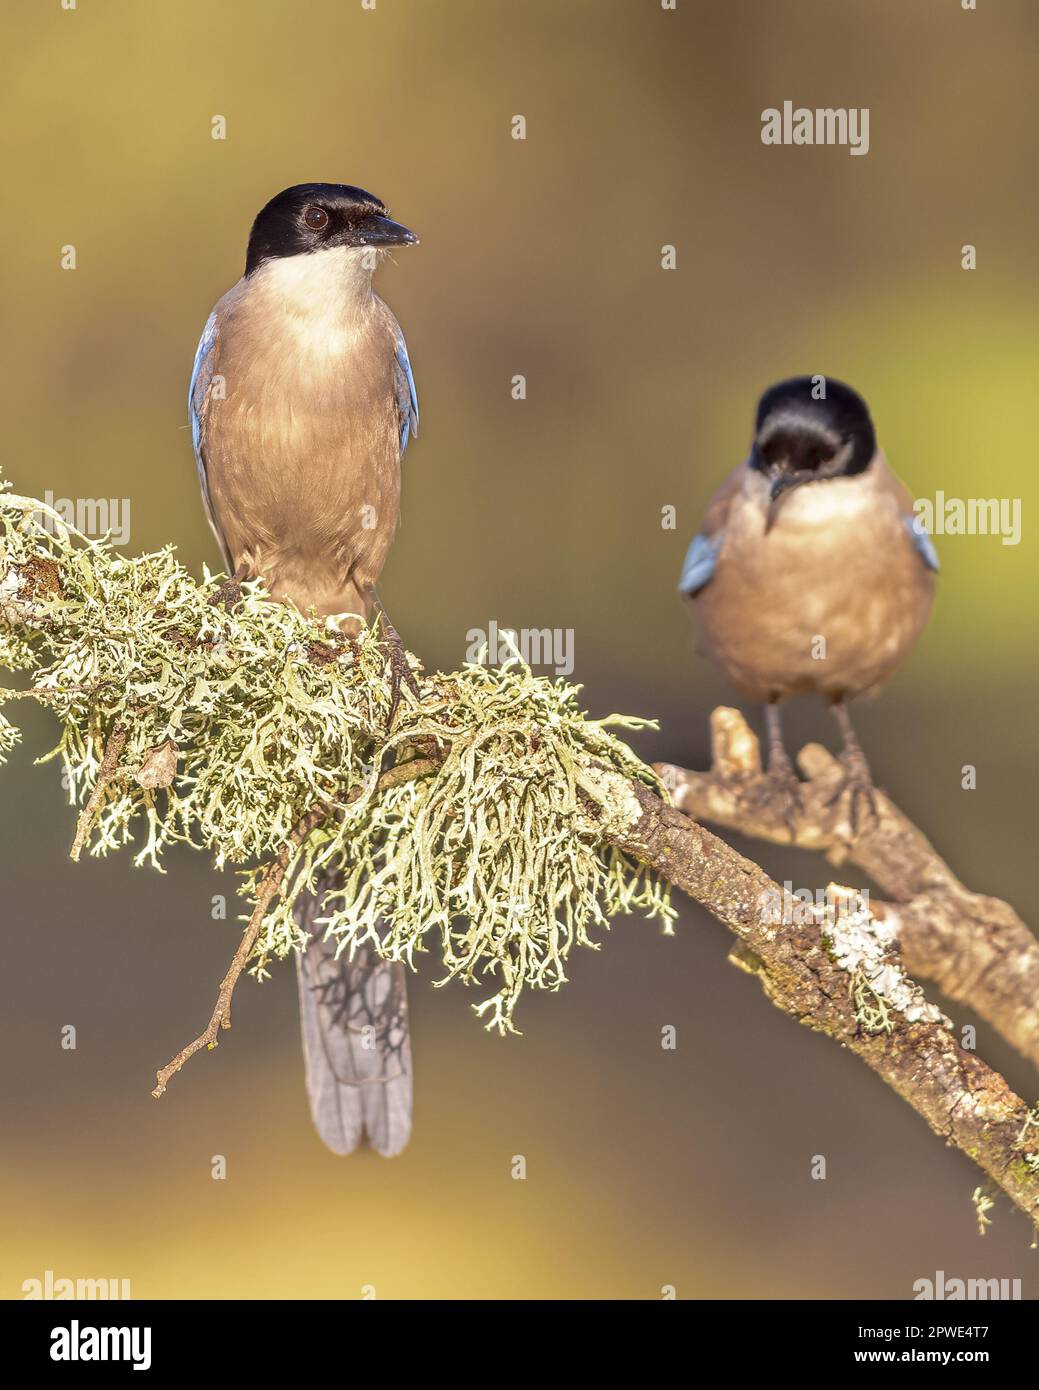 Iberian magpie (Cyanopica cooki) is a bird in the crow family. Pair of Birds perched on branch against bright background in Extremadura, Spain. Wildli Stock Photo